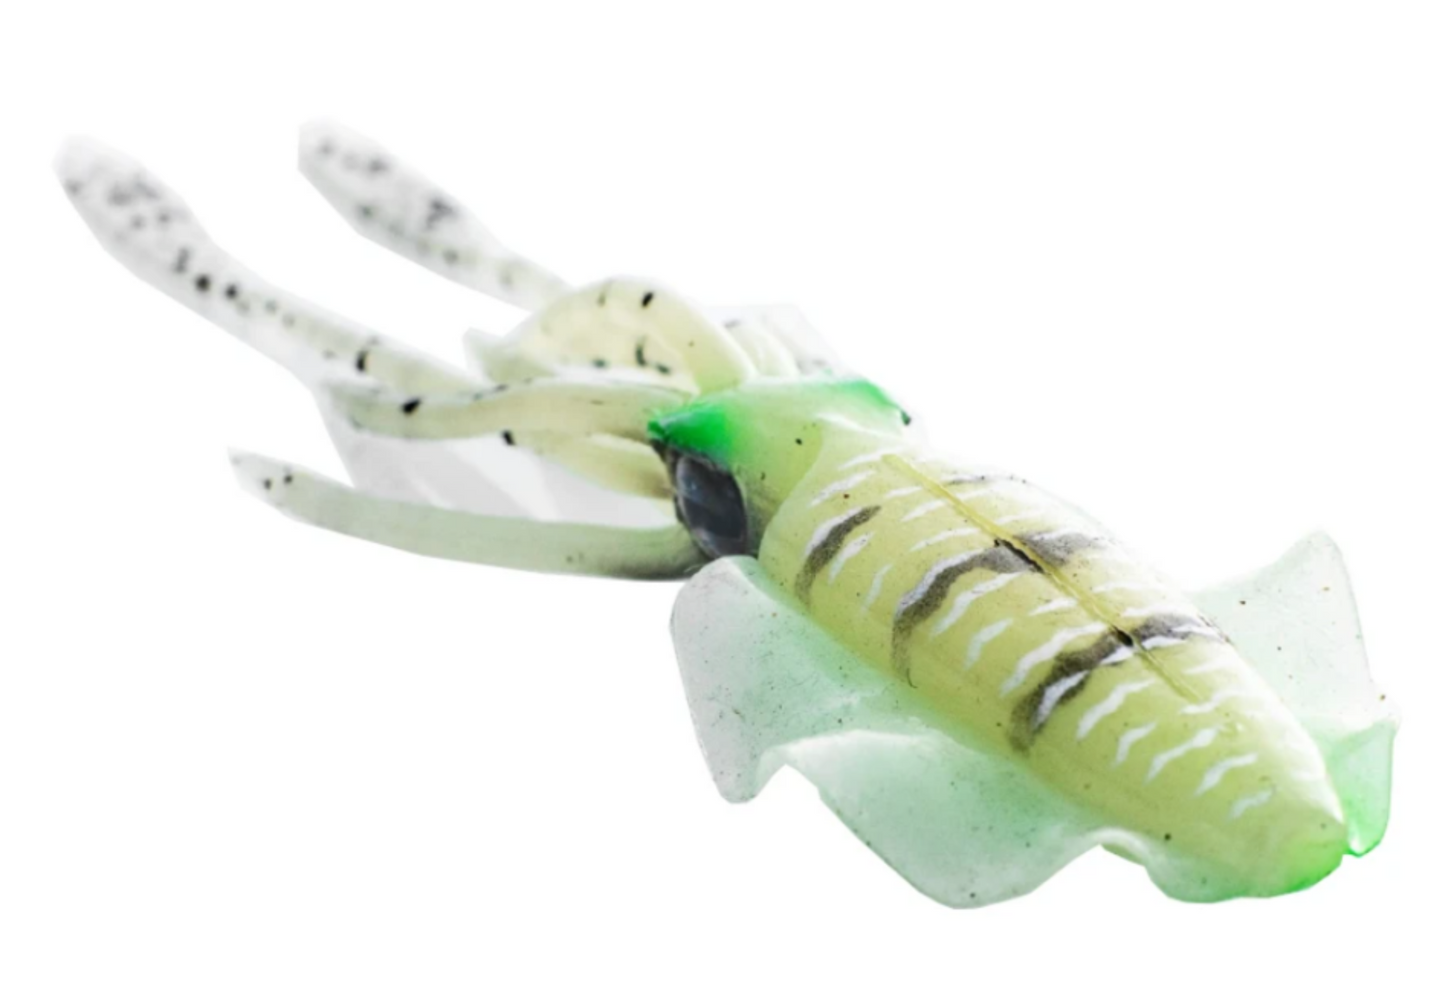 Chasebaits The Ultimate Squid Soft Lure